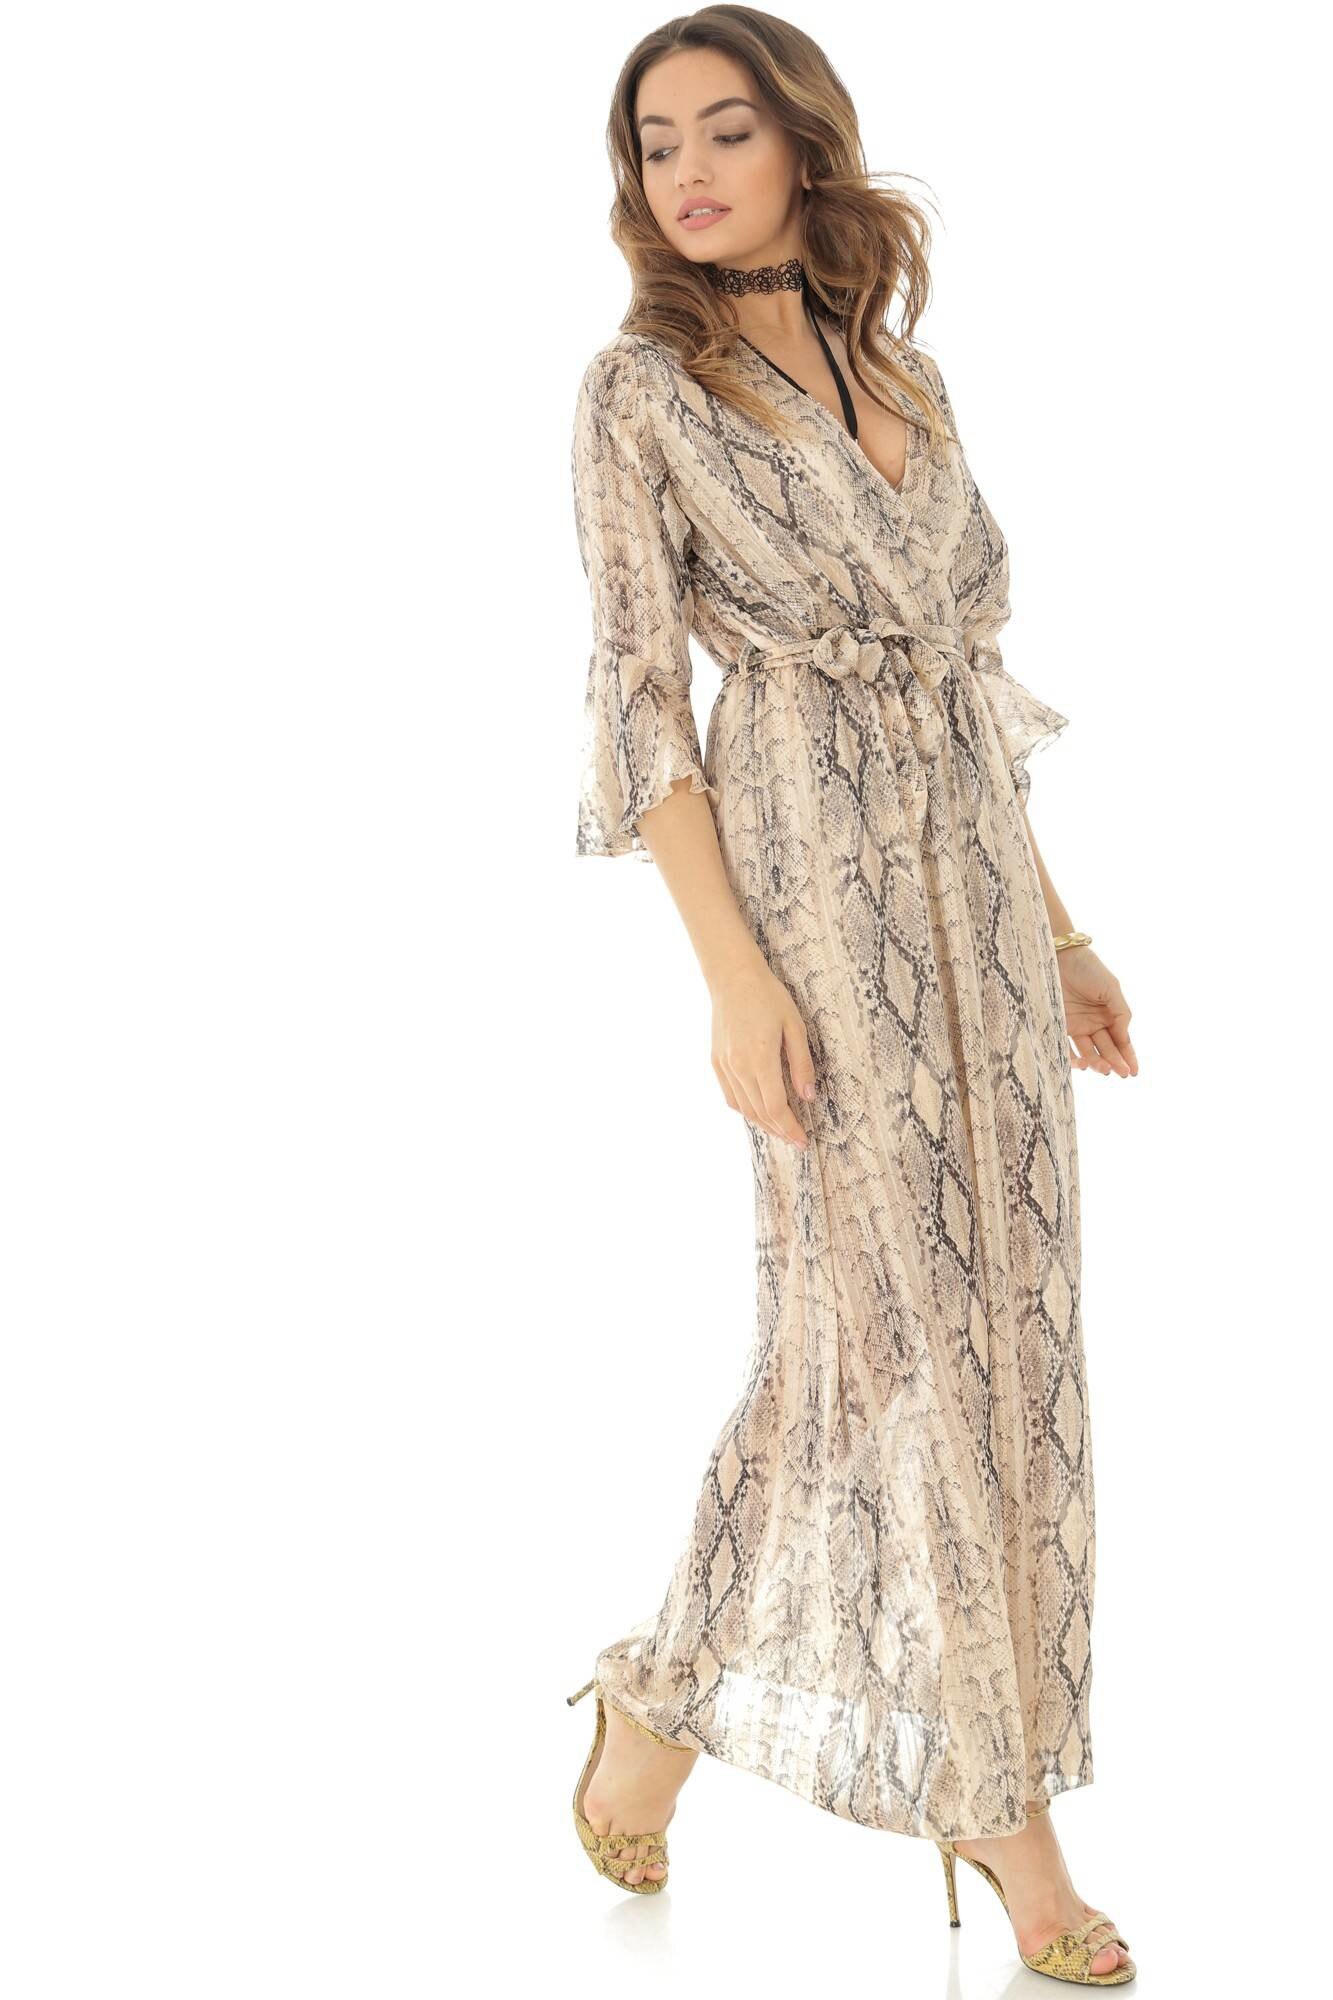 Planting trees Grasp Efficient Rochie maxi, snake print, ROH, M - eMAG.ro